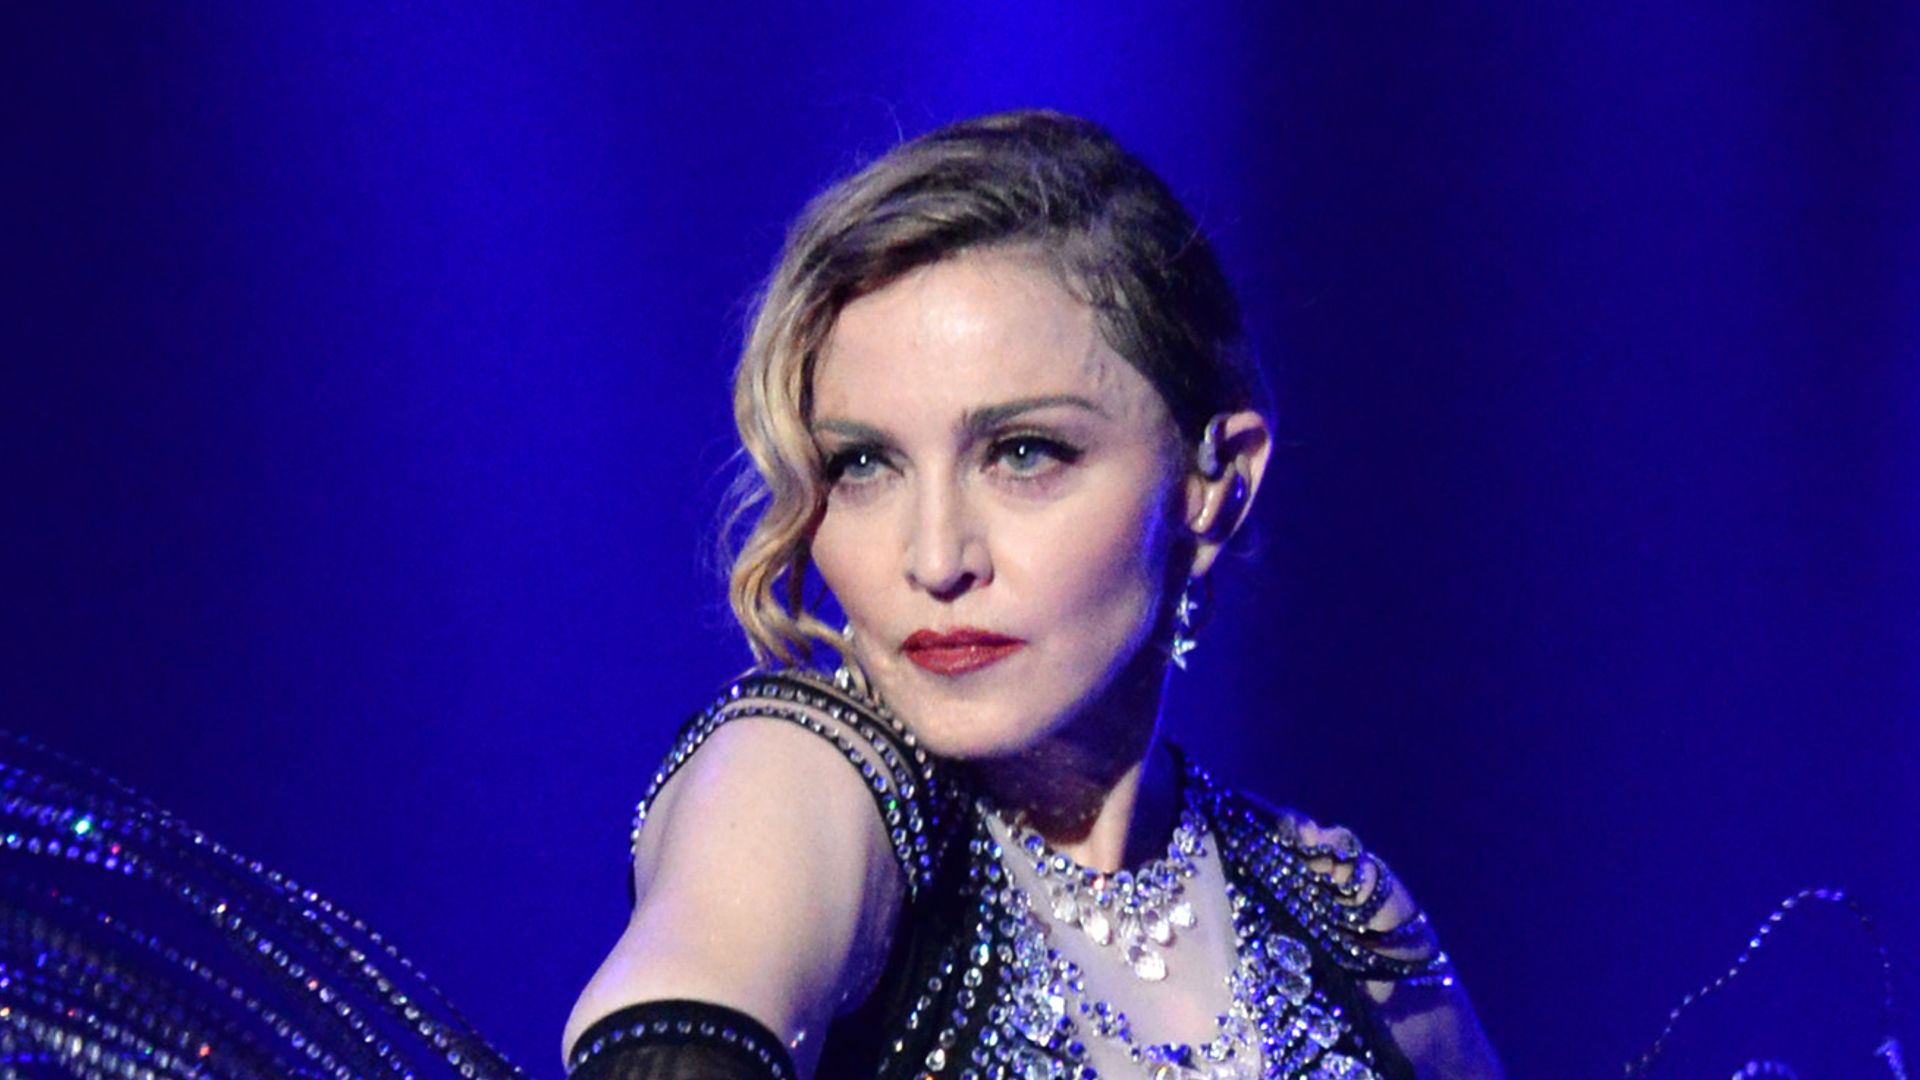 Madonna performs onstage during her "Rebel Heart" tour opener at Bell Centre on September 9, 2015 in Montreal, Canada